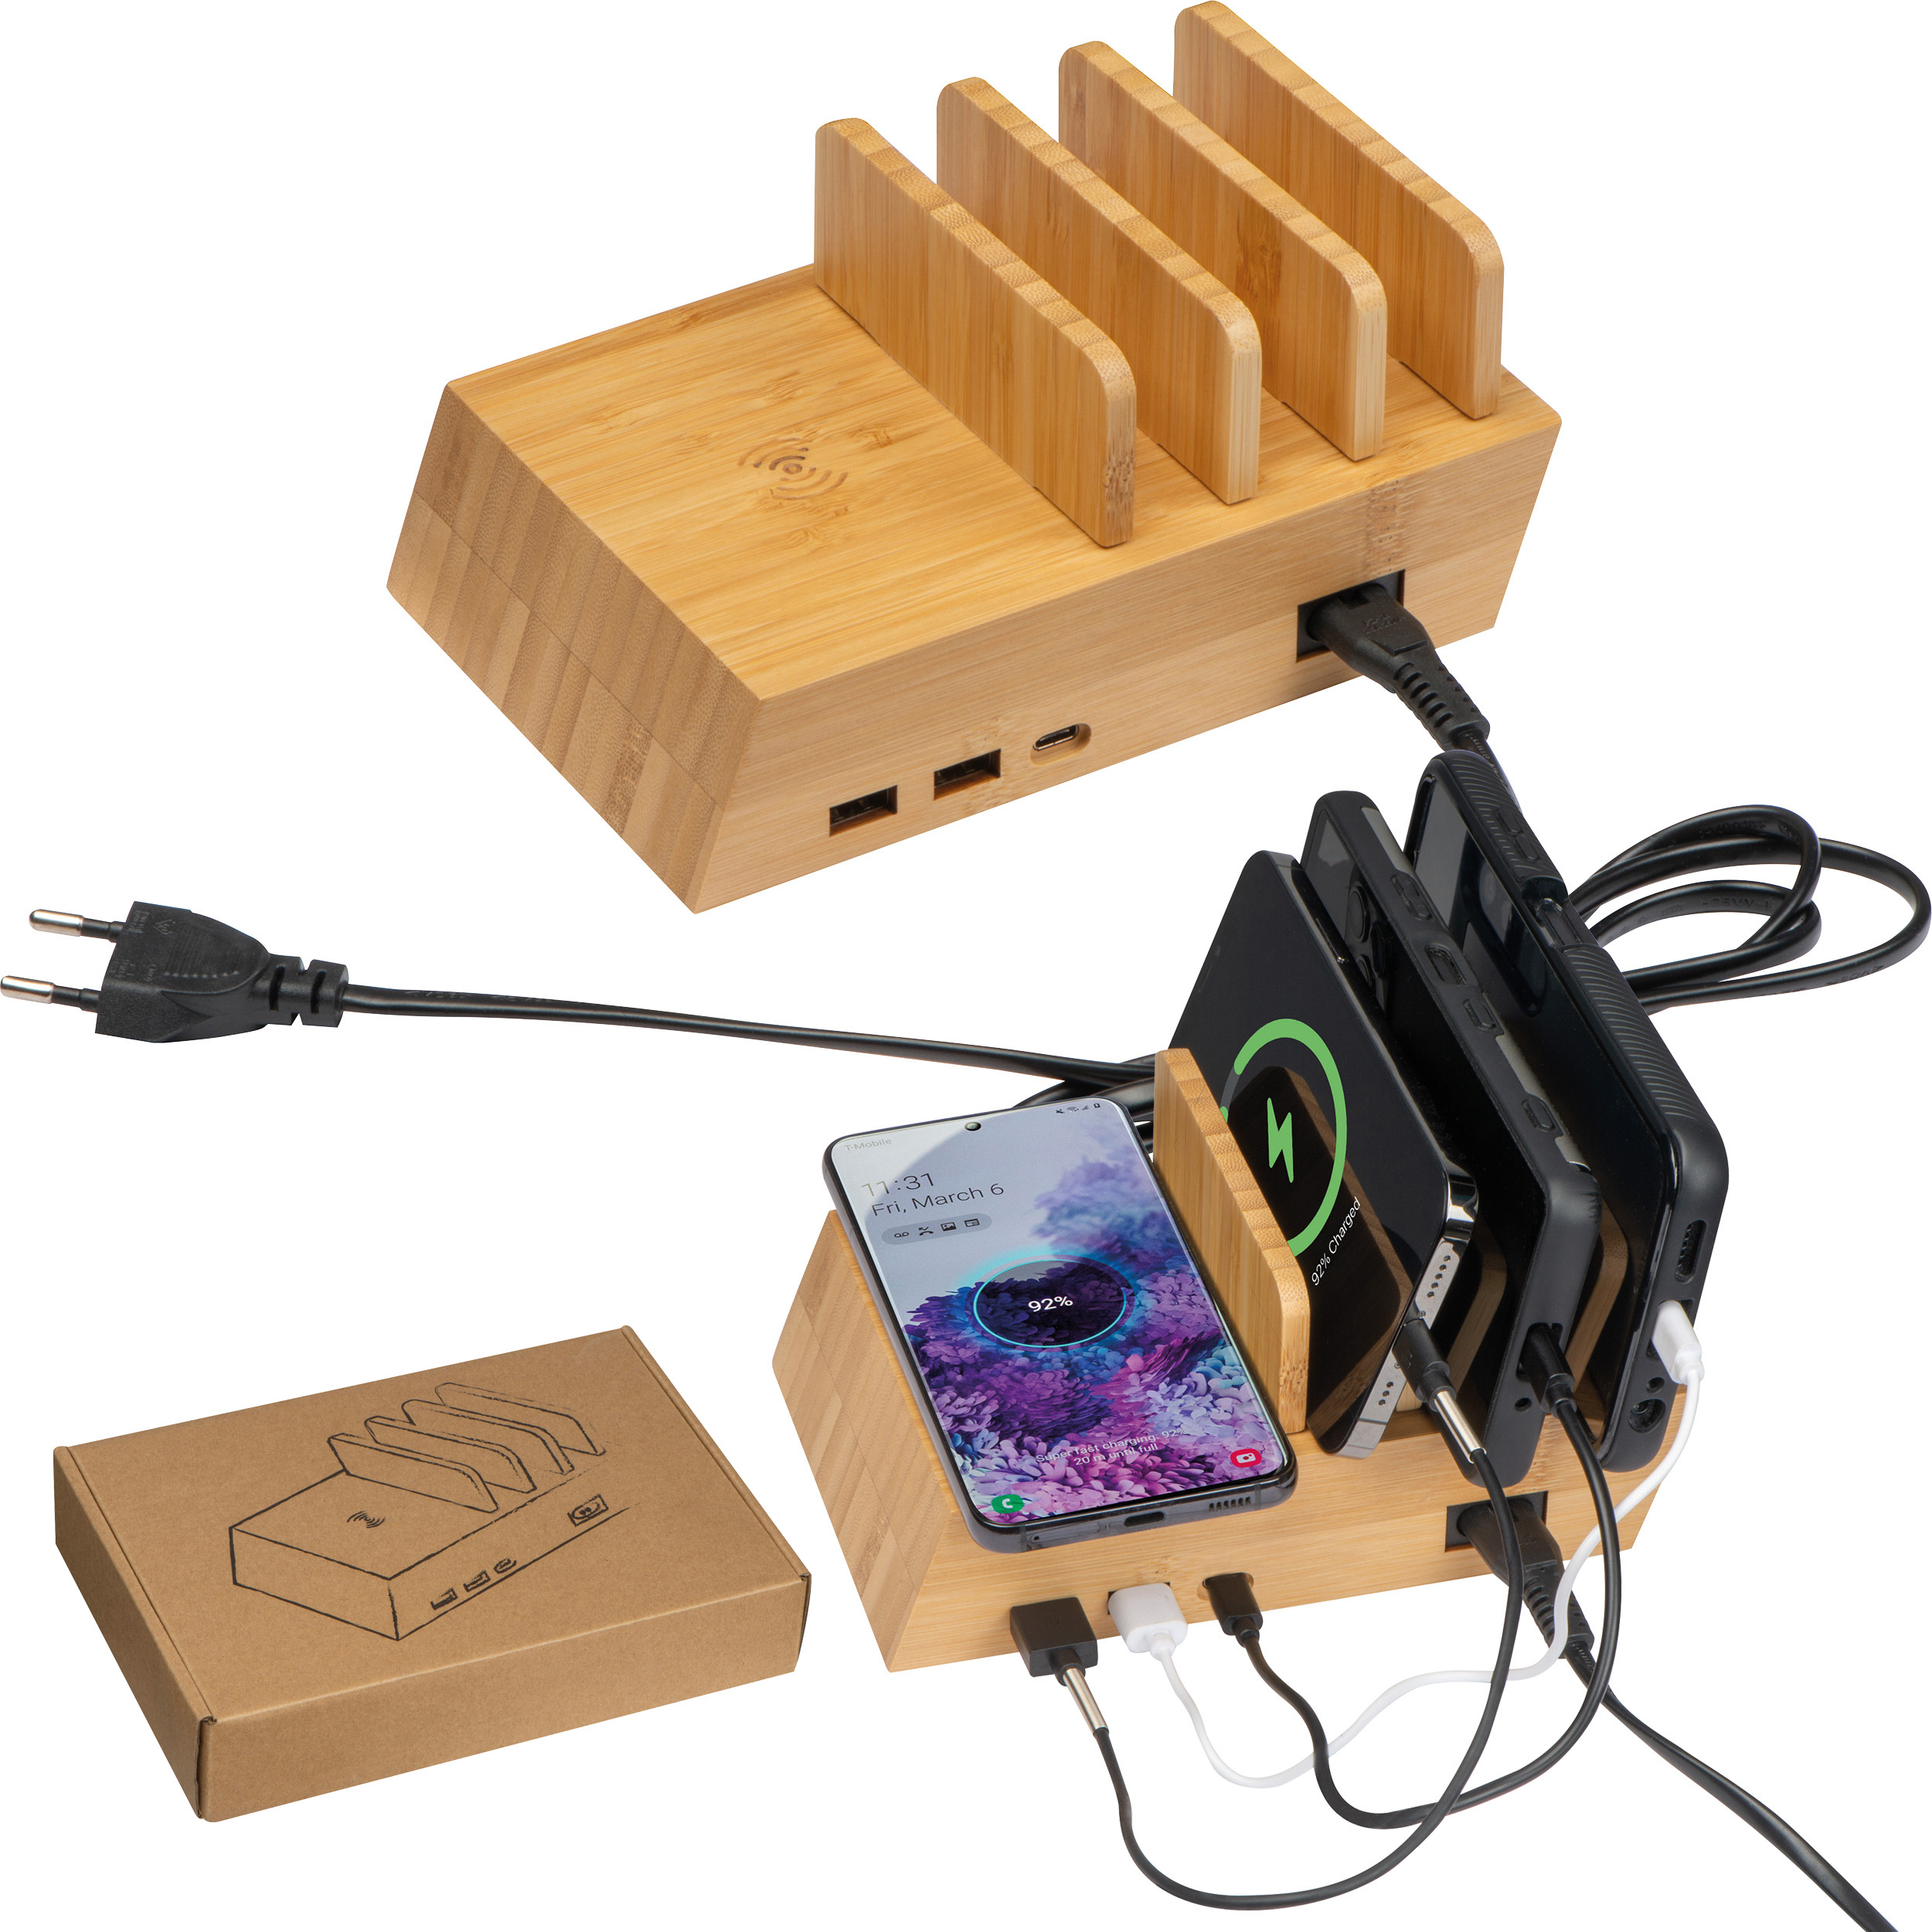 Charging station for 4 devices